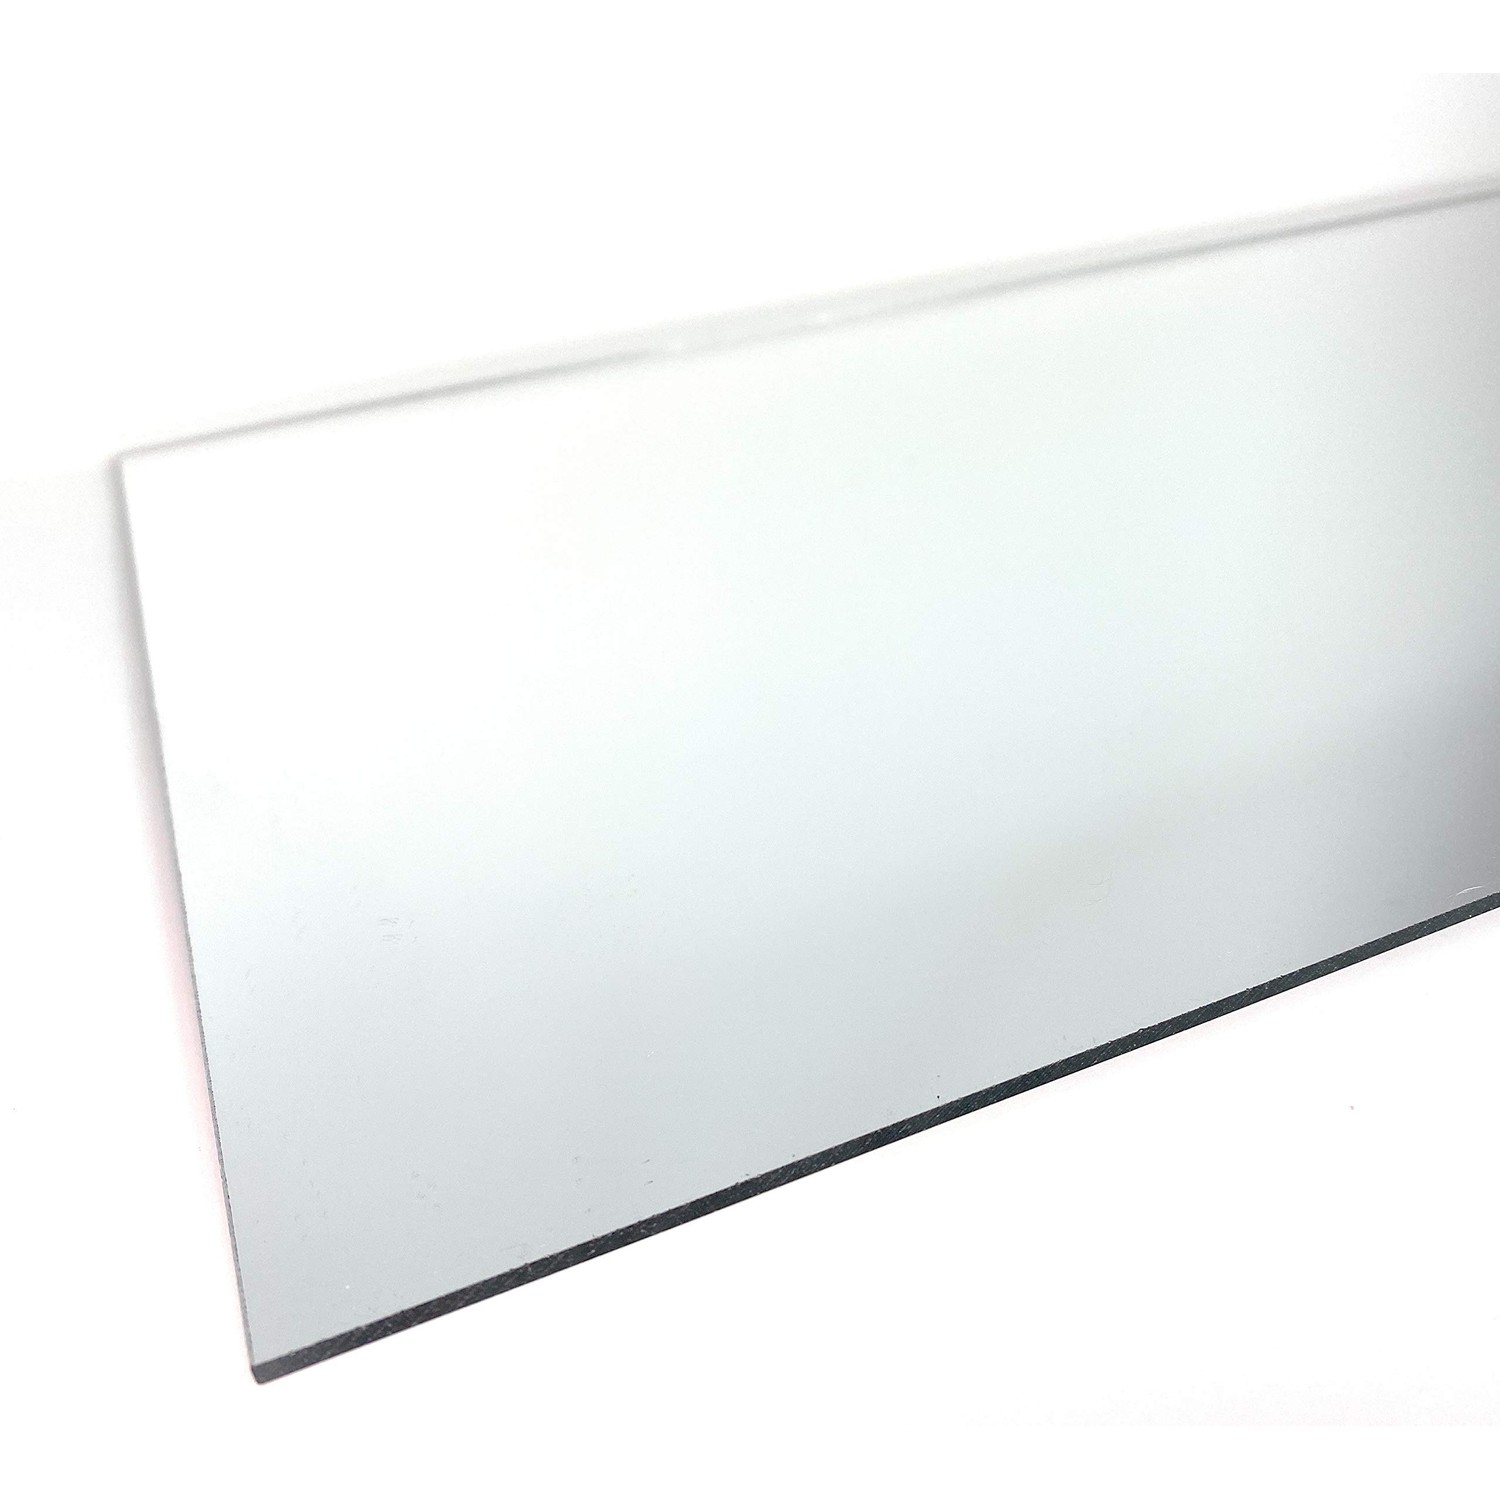 12 X 24 Acrylic Plastic Mirror Sheet With Finished Polished Edges By E.H.C  (2)